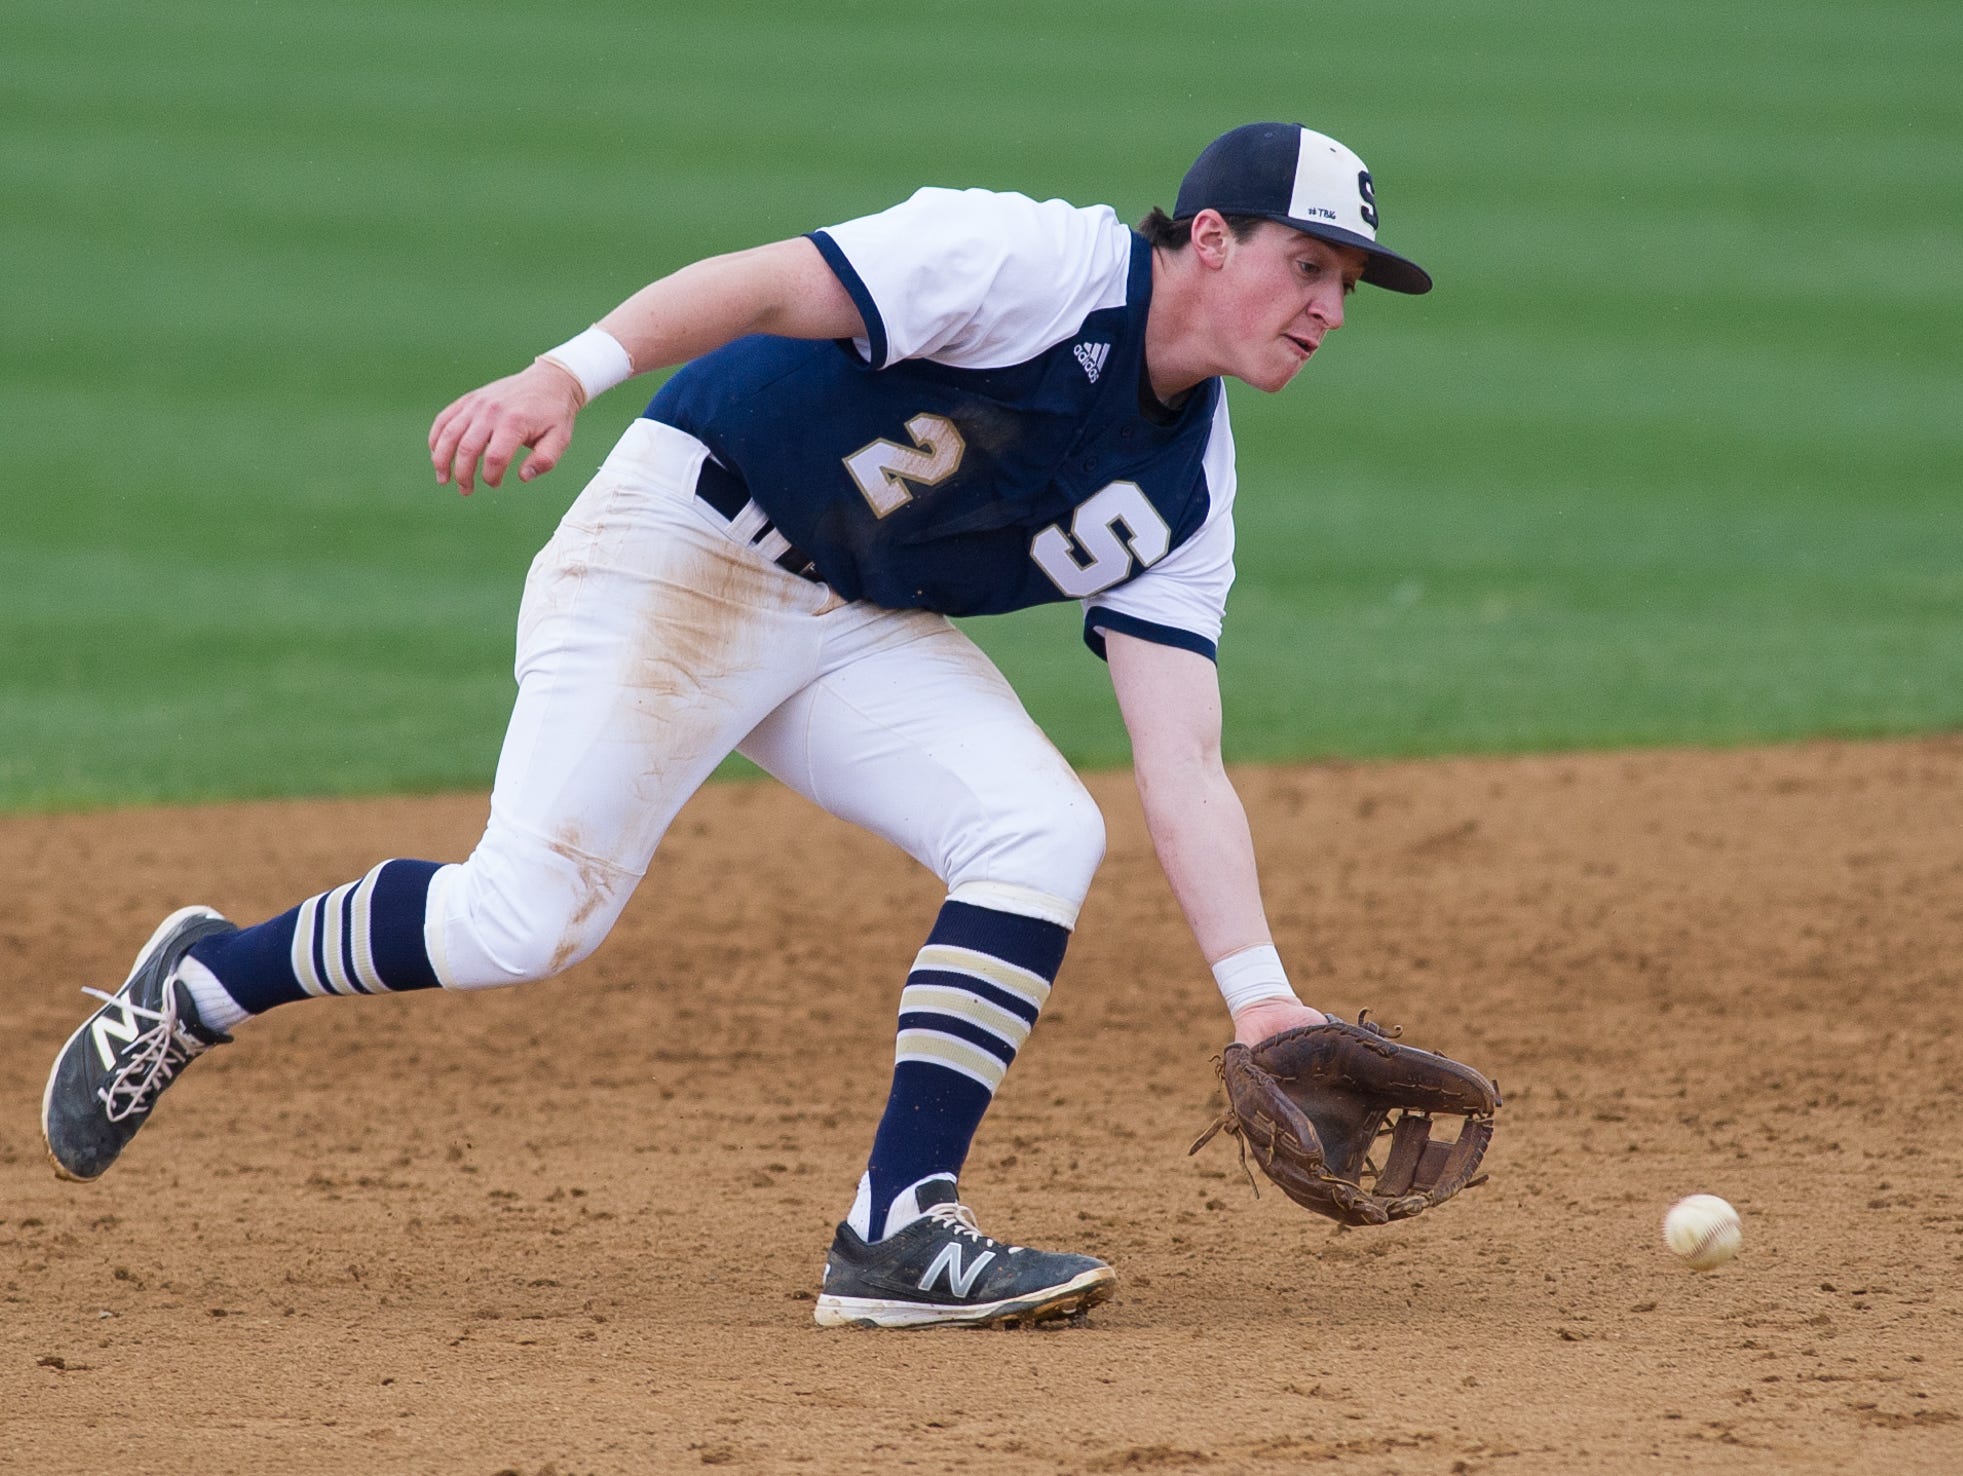 Salesianum's John Andreoli (2) make a grab on a ground ball in their game against Cape Henlopen.